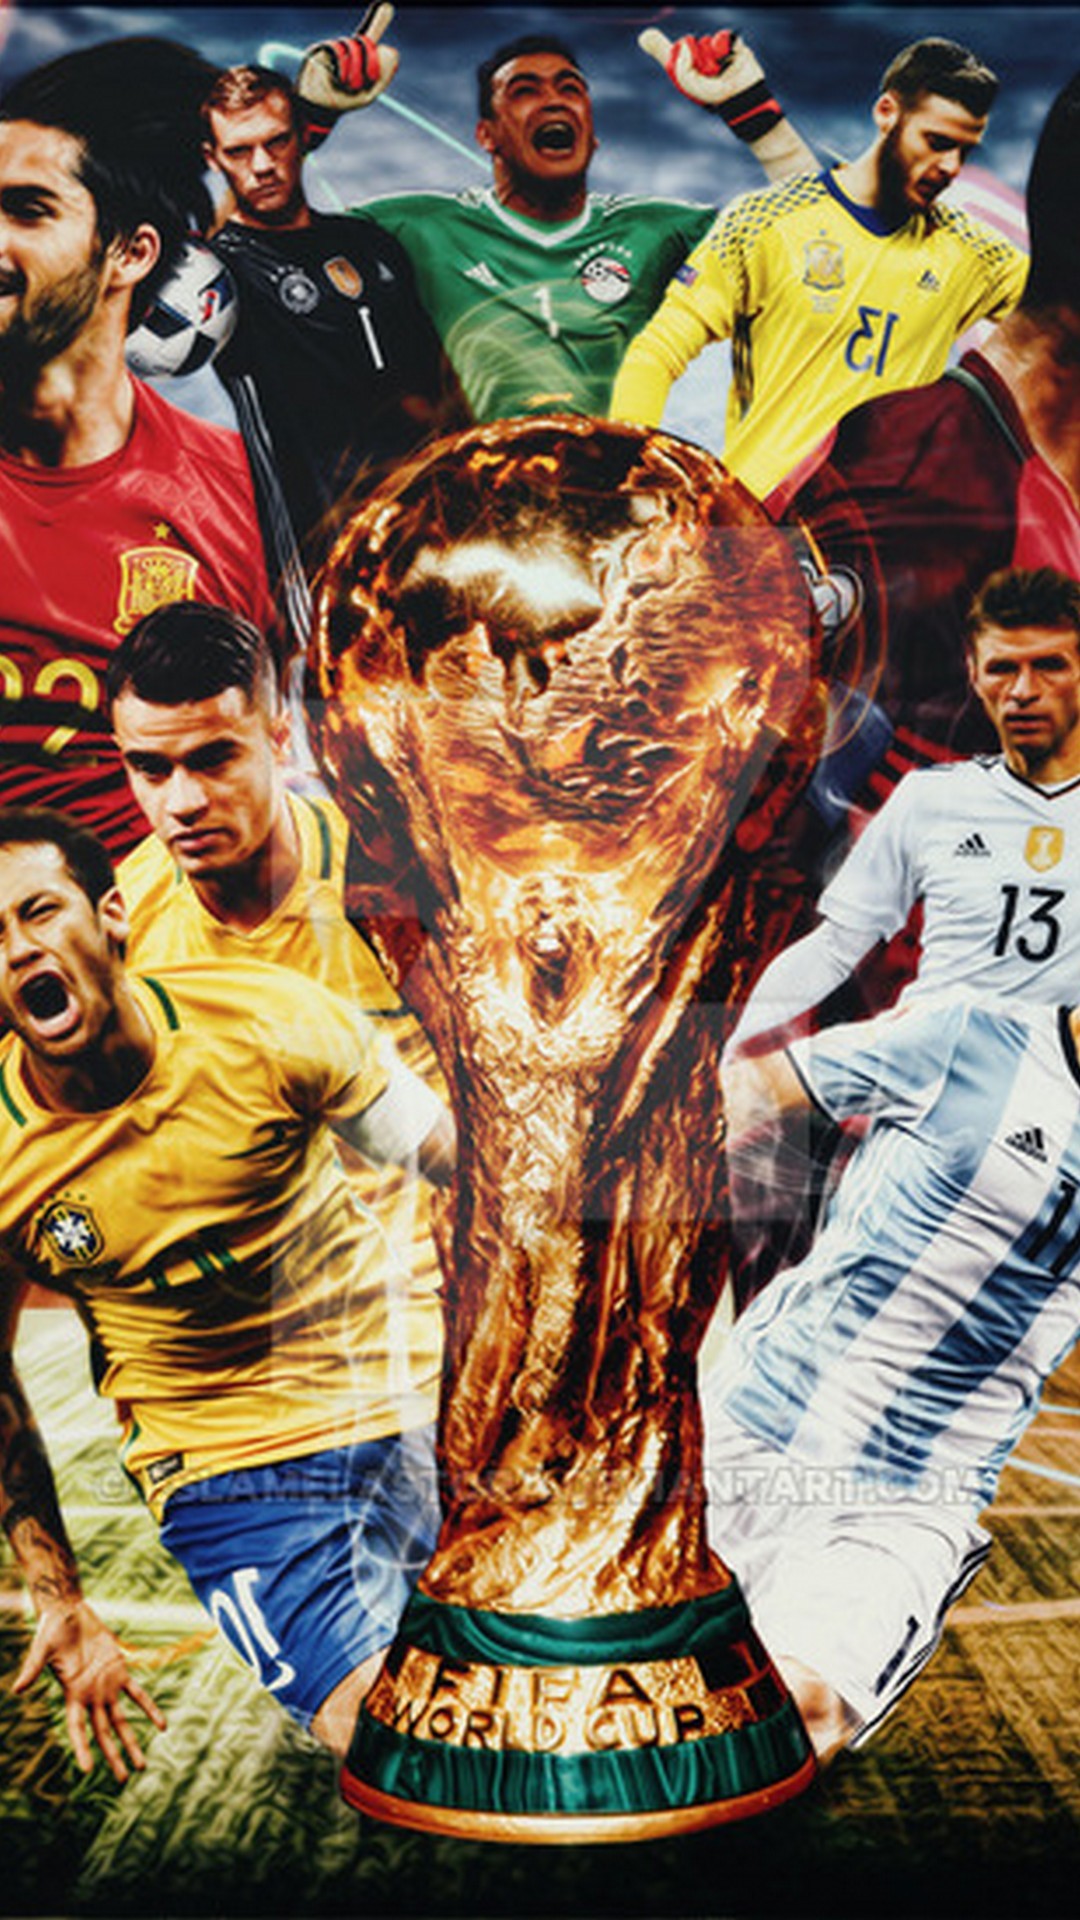 Wallpapers FIFA World Cup with HD resolution 1080x1920